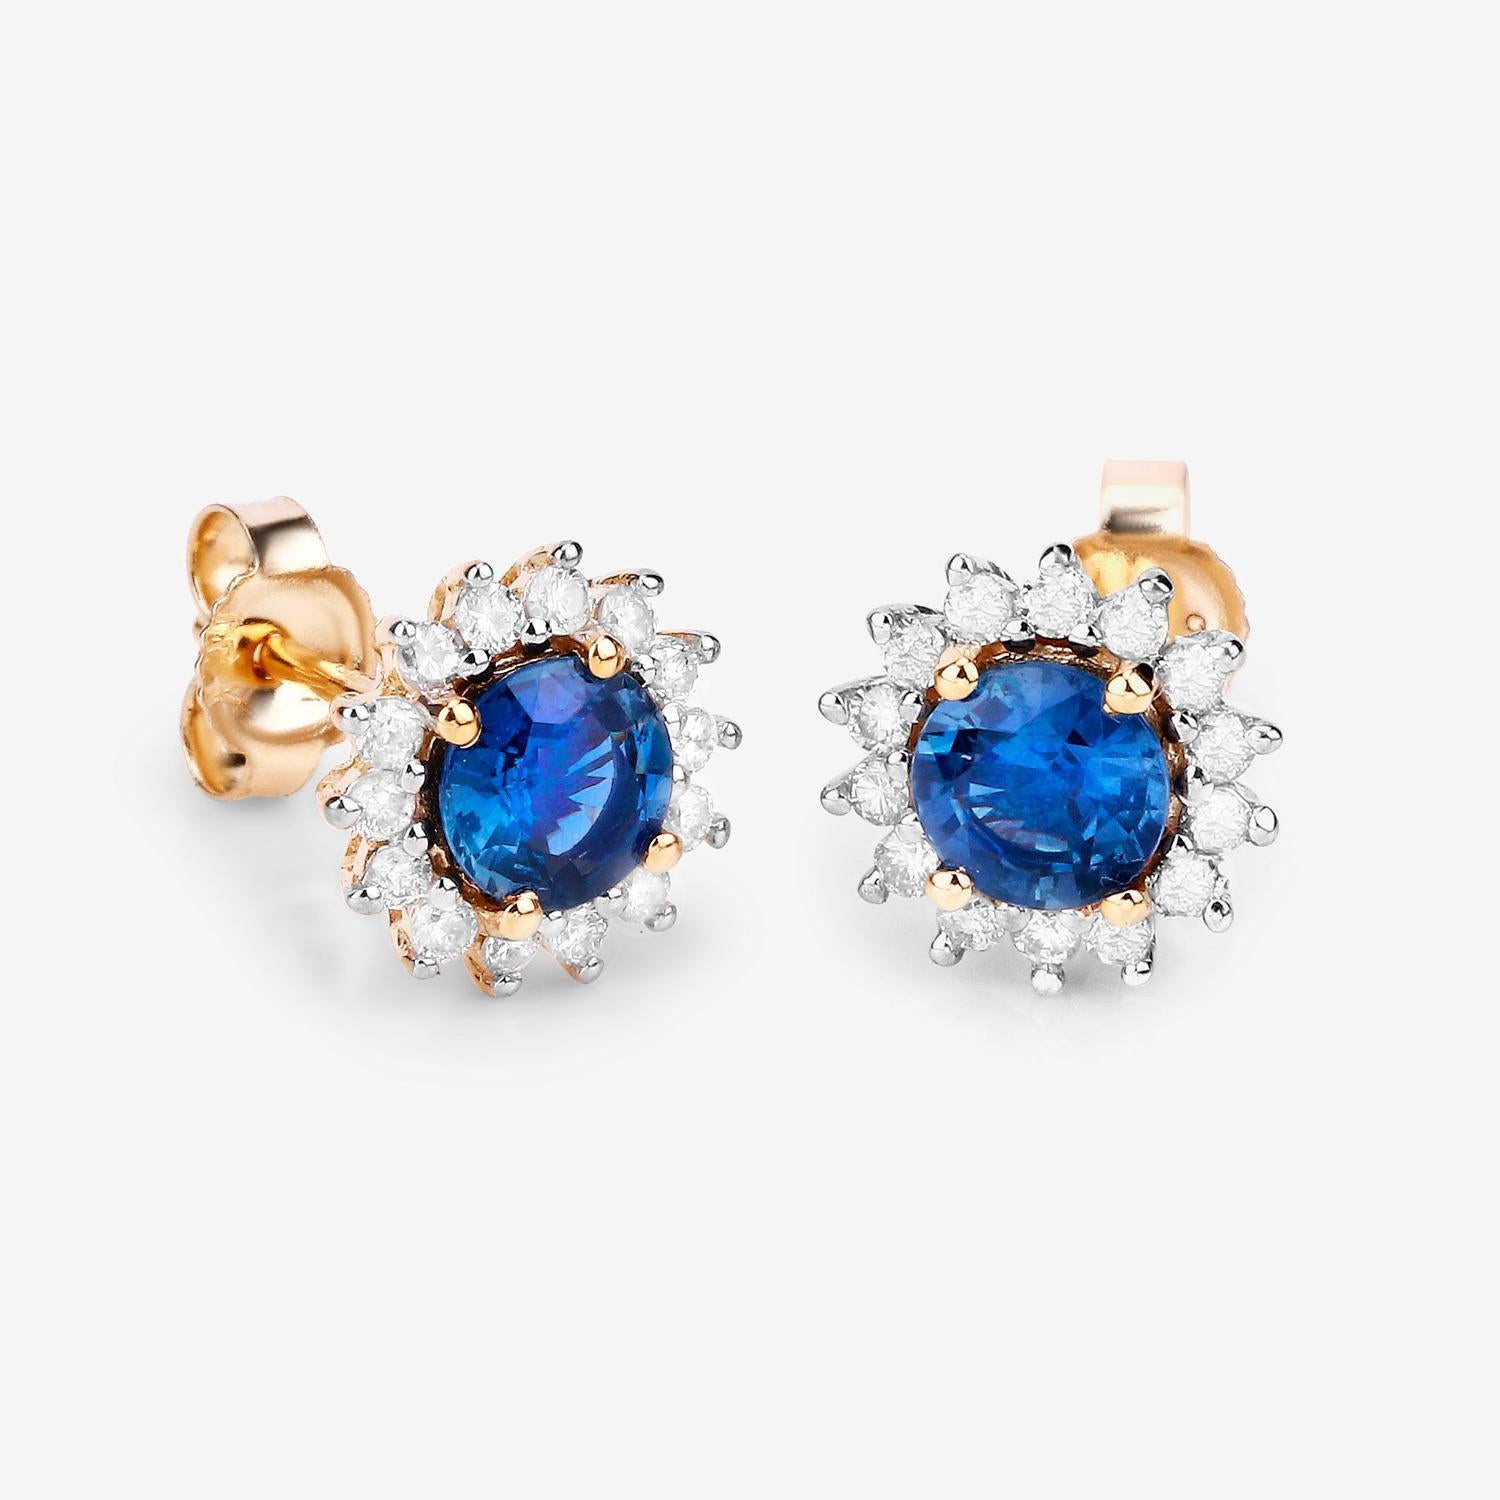 Natural Blue Sapphire Stud Earrings Diamond Halo 1.6 Carats 14K Yellow Gold In Excellent Condition For Sale In Laguna Niguel, CA